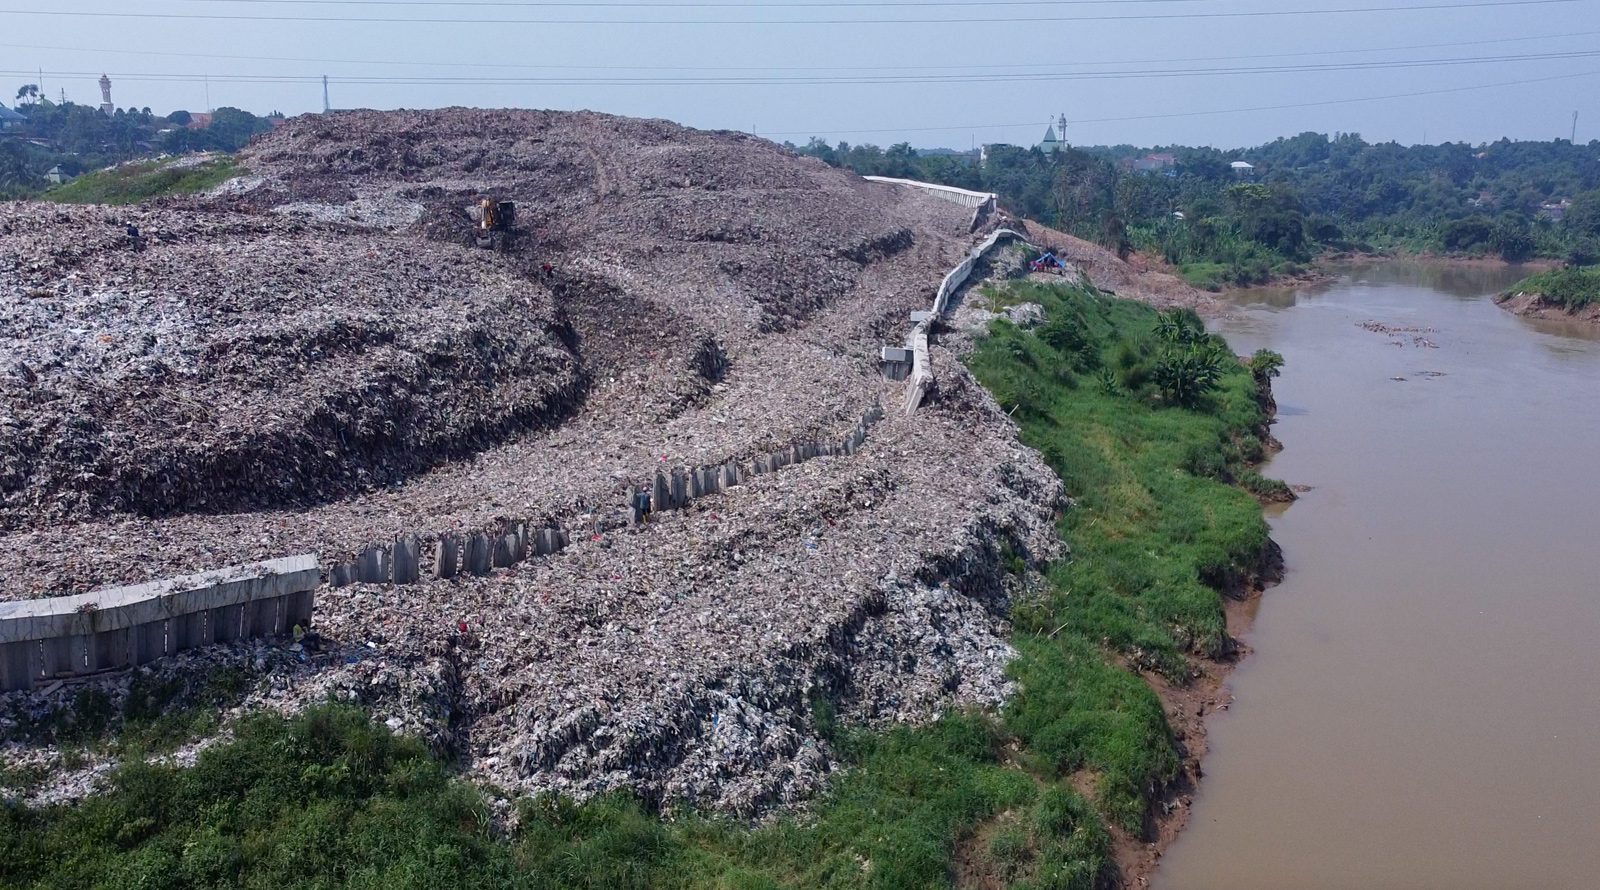 An aerial view of a waste landslide at the Cipeucang landfill in South Tangerang, Indonesia.